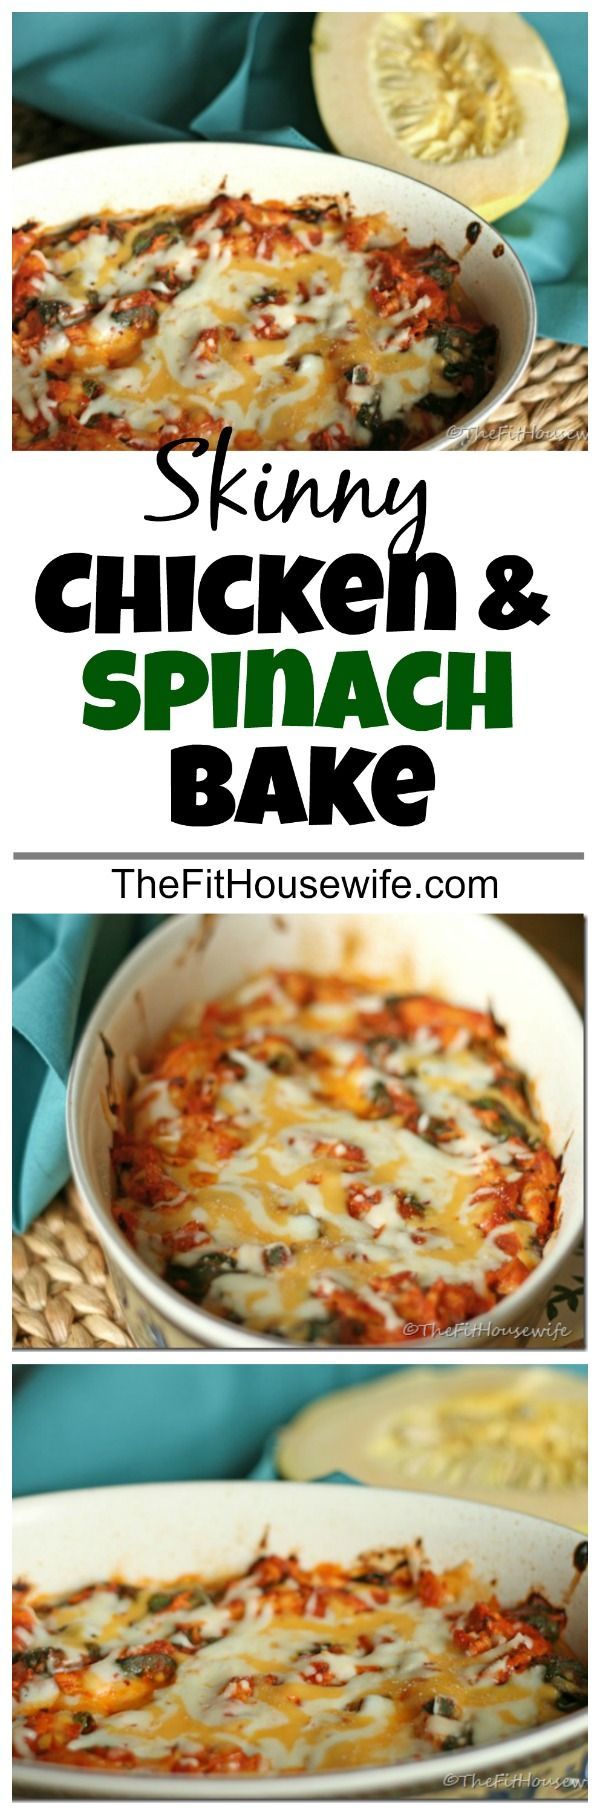 Skinny Chicken and Spinach Bake